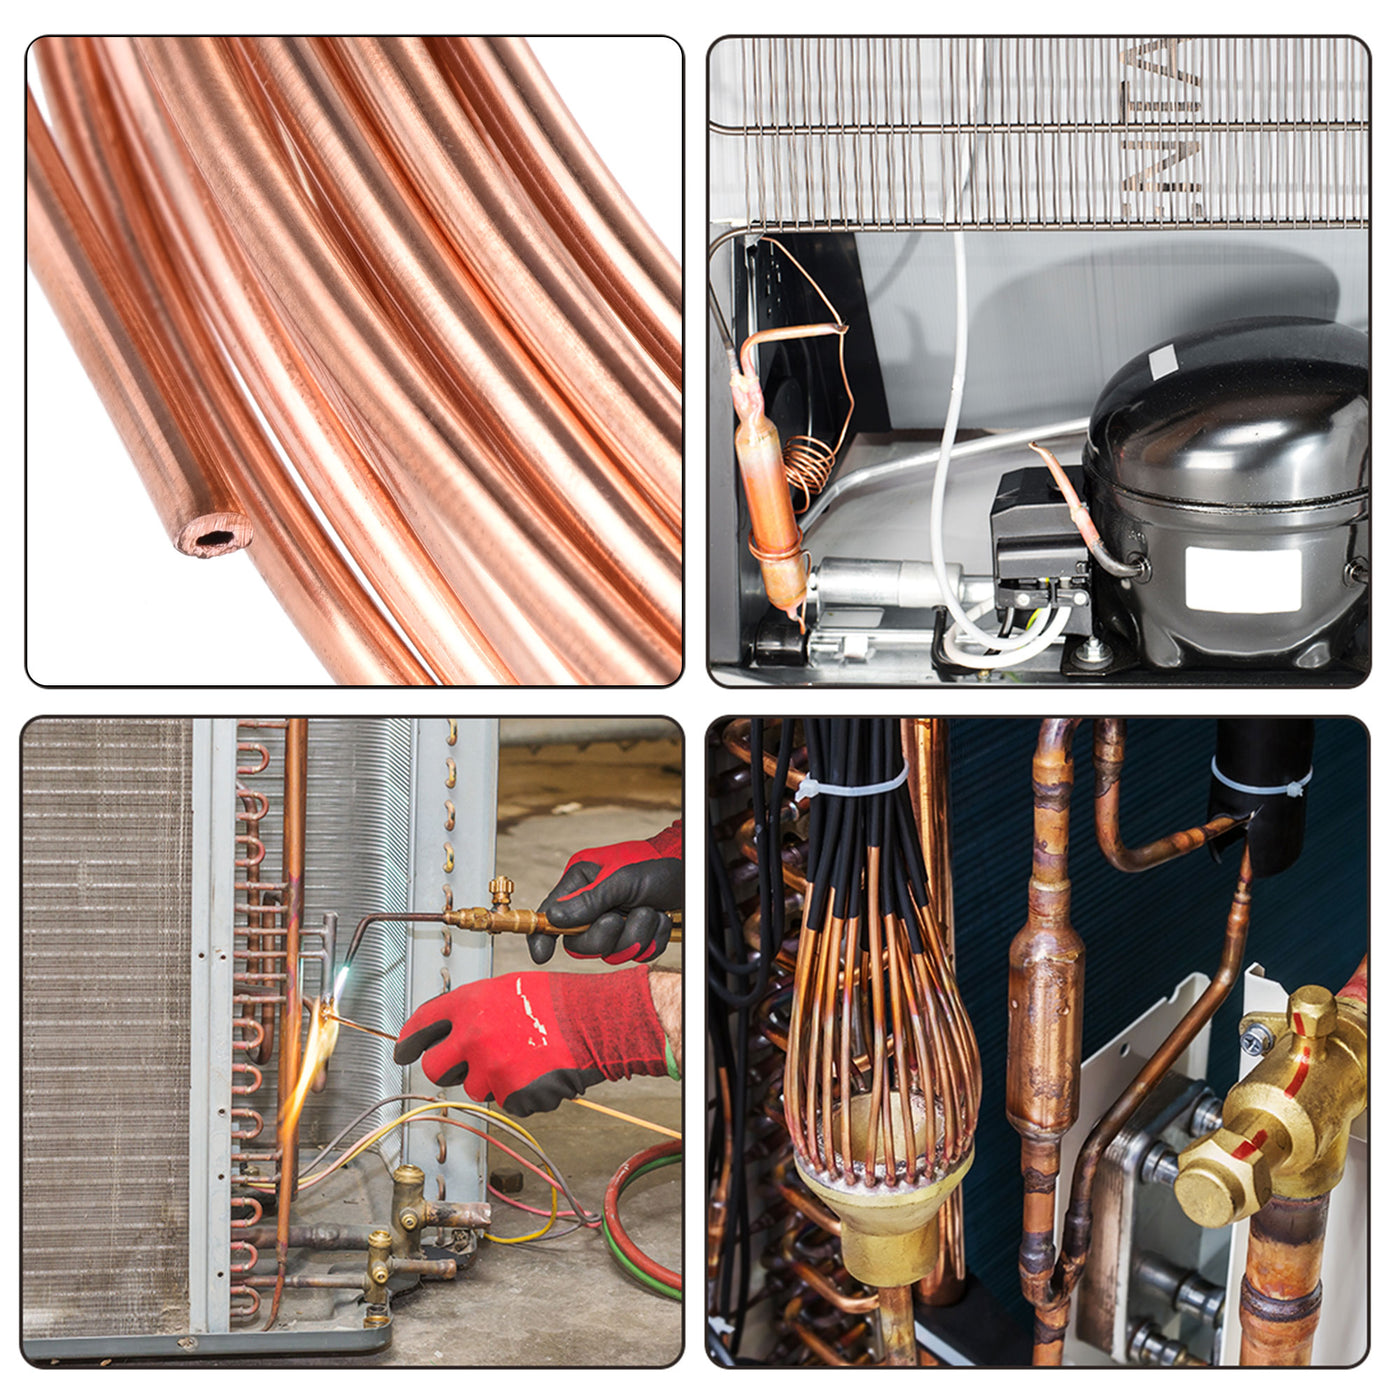 uxcell Uxcell Refrigeration Tubing Copper Tubing Coil for Refrigerator, Freezer and Air Conditioner